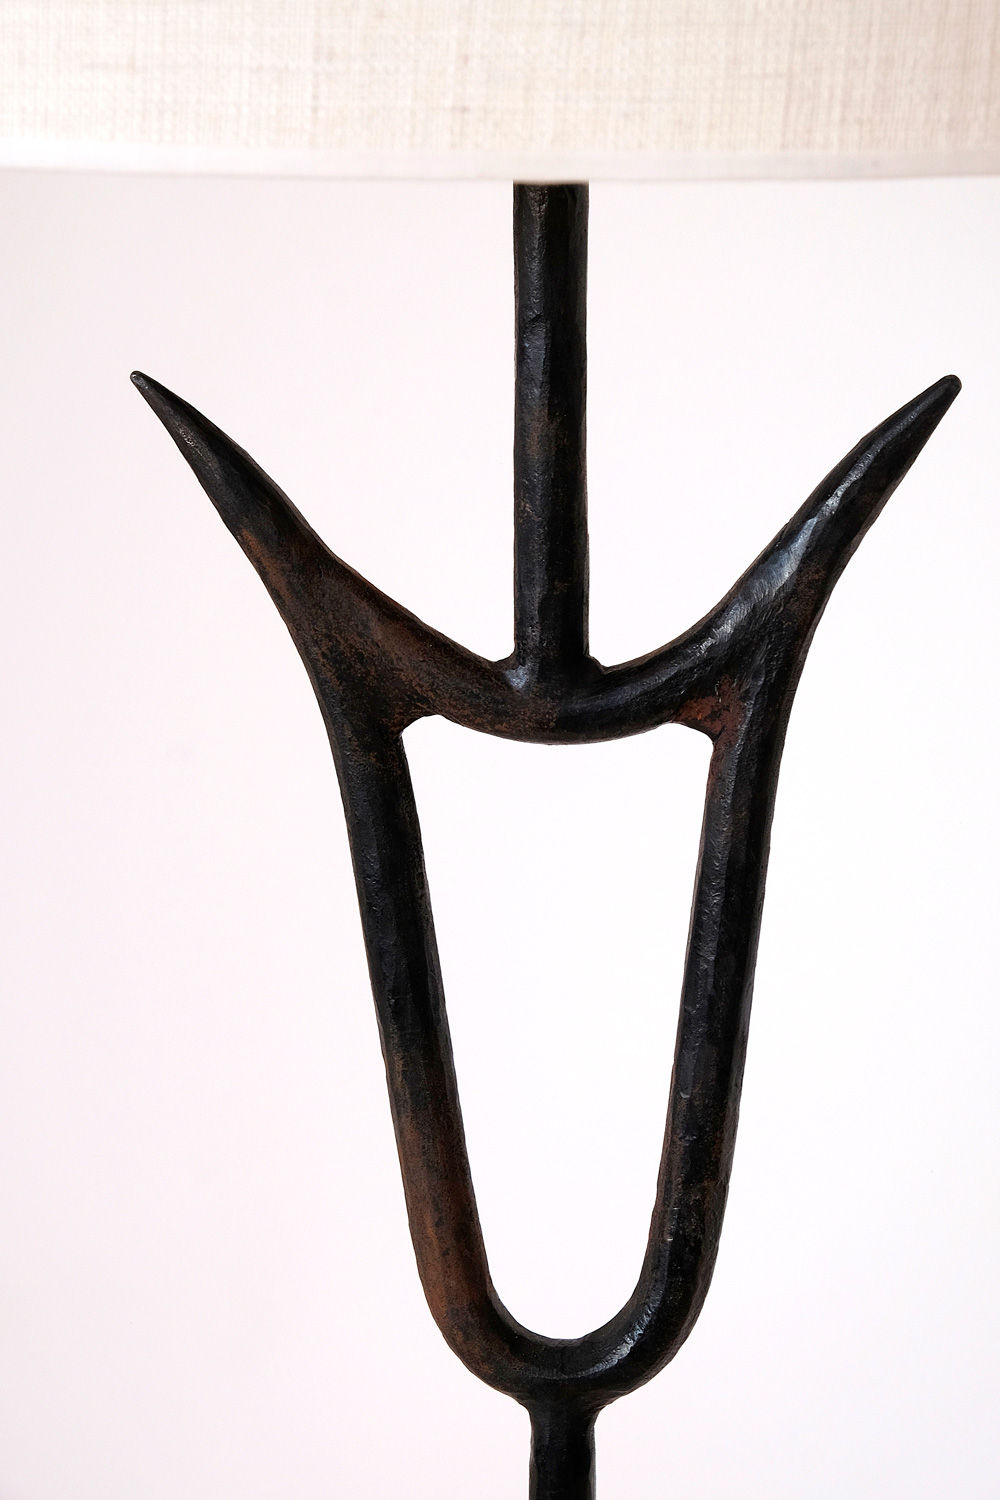 Close-up of the "Sevilla" Lamp by Barracuda Interiors, an artistic bull lamp base made of dark, zoomorphic hammered iron with an abstract design. The base features two upward-facing, curved prongs connected by a central vertical rod, creating a unique, symmetrical shape against a plain white background.